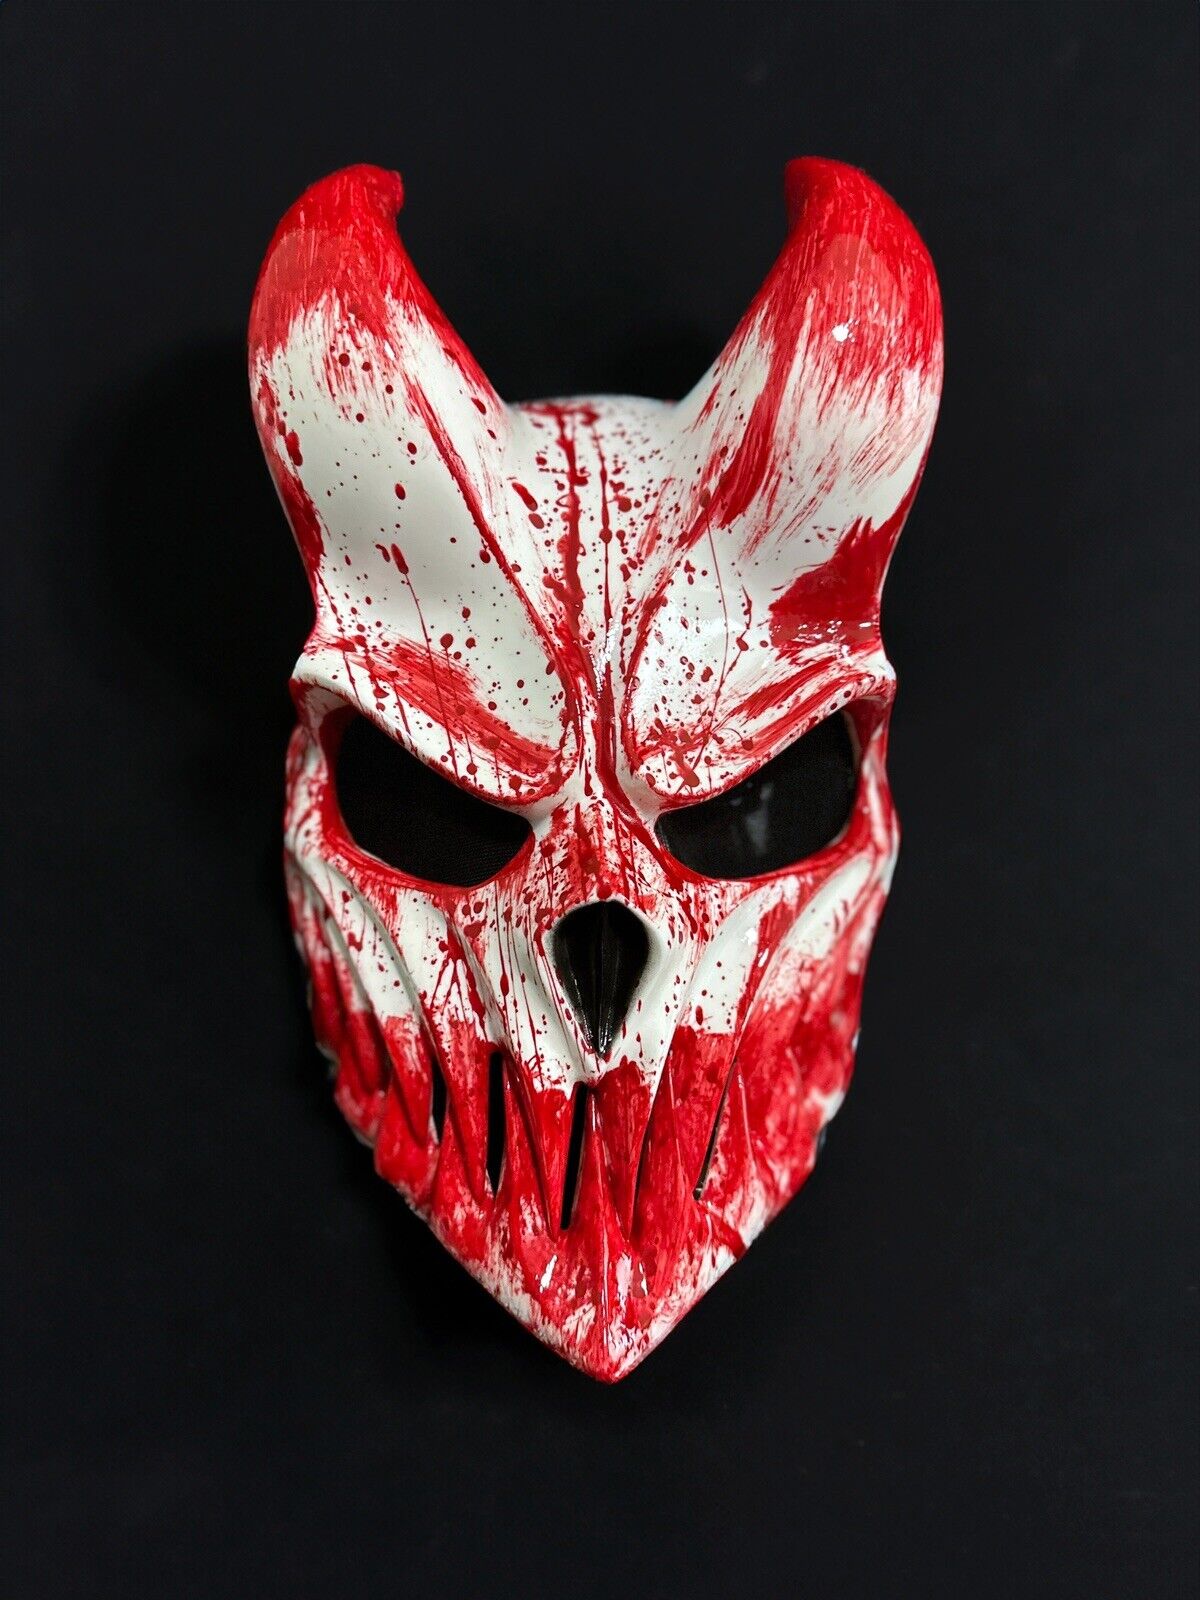 (SLAUGHTER TO PREVAIL) ALEX TERRIBLE MASK “KID OF DARKNESS” (BLOOD USA Version)